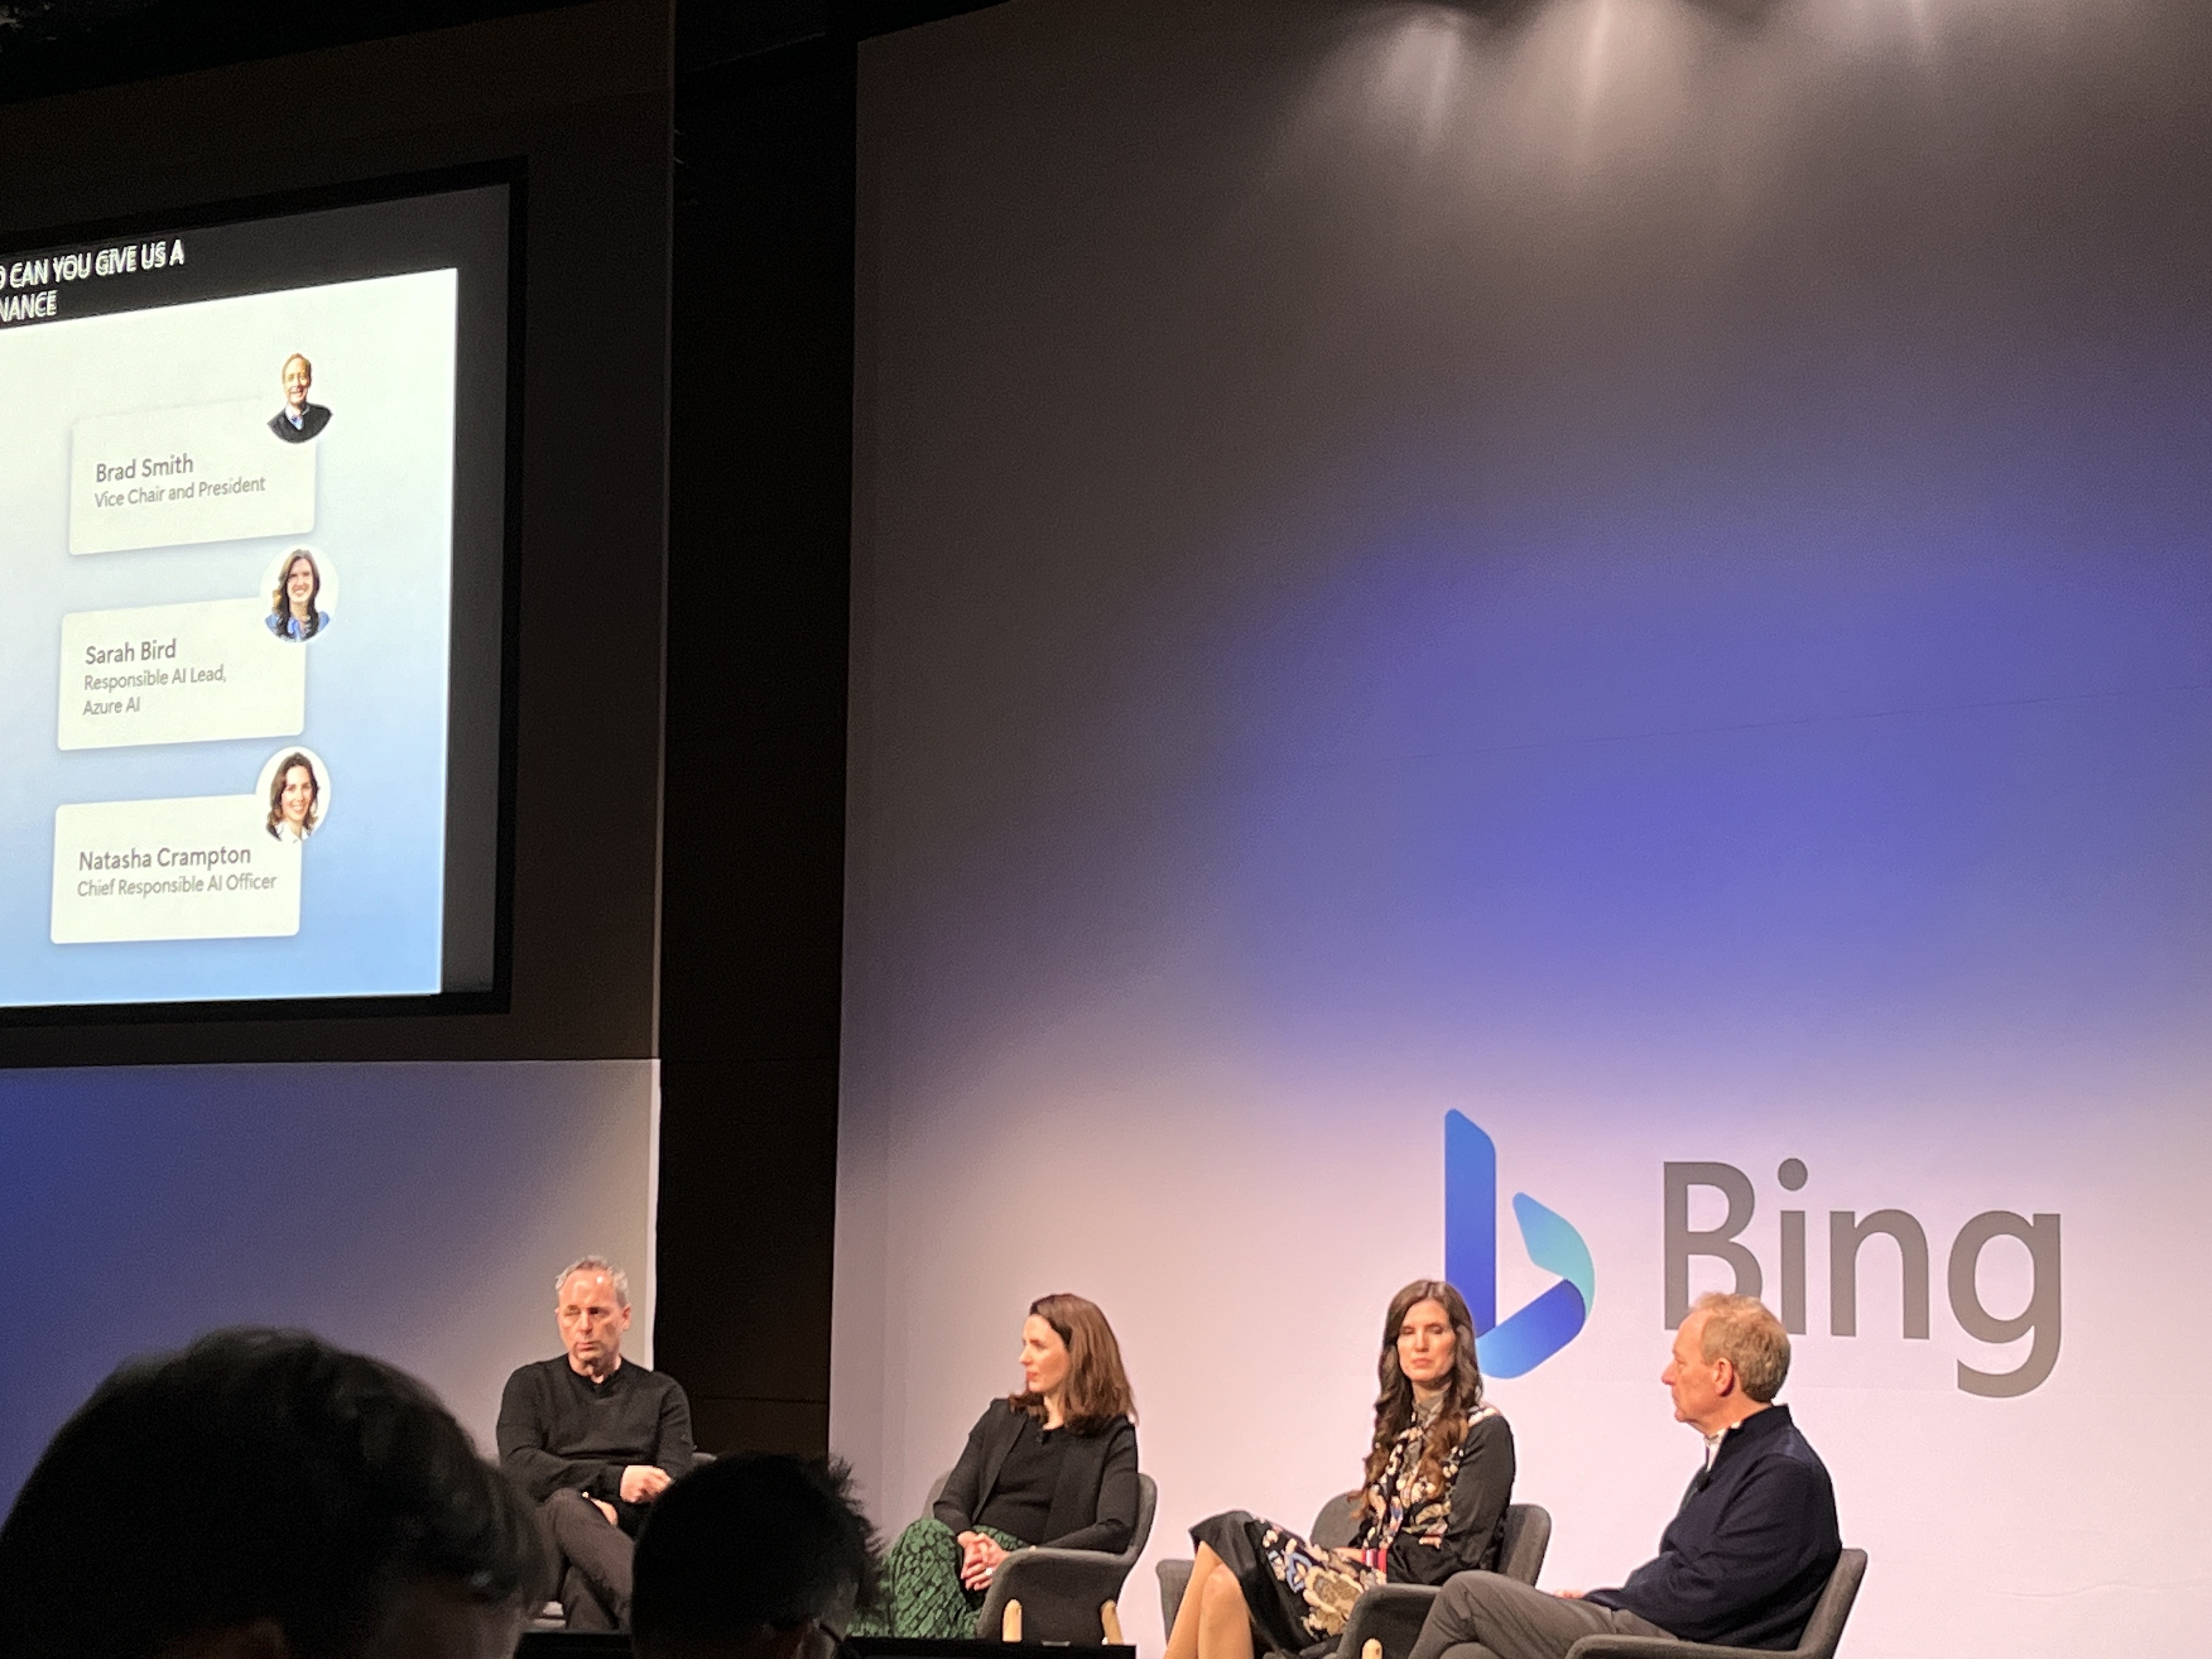 Responsible AI discussion at the new Microsoft bing event